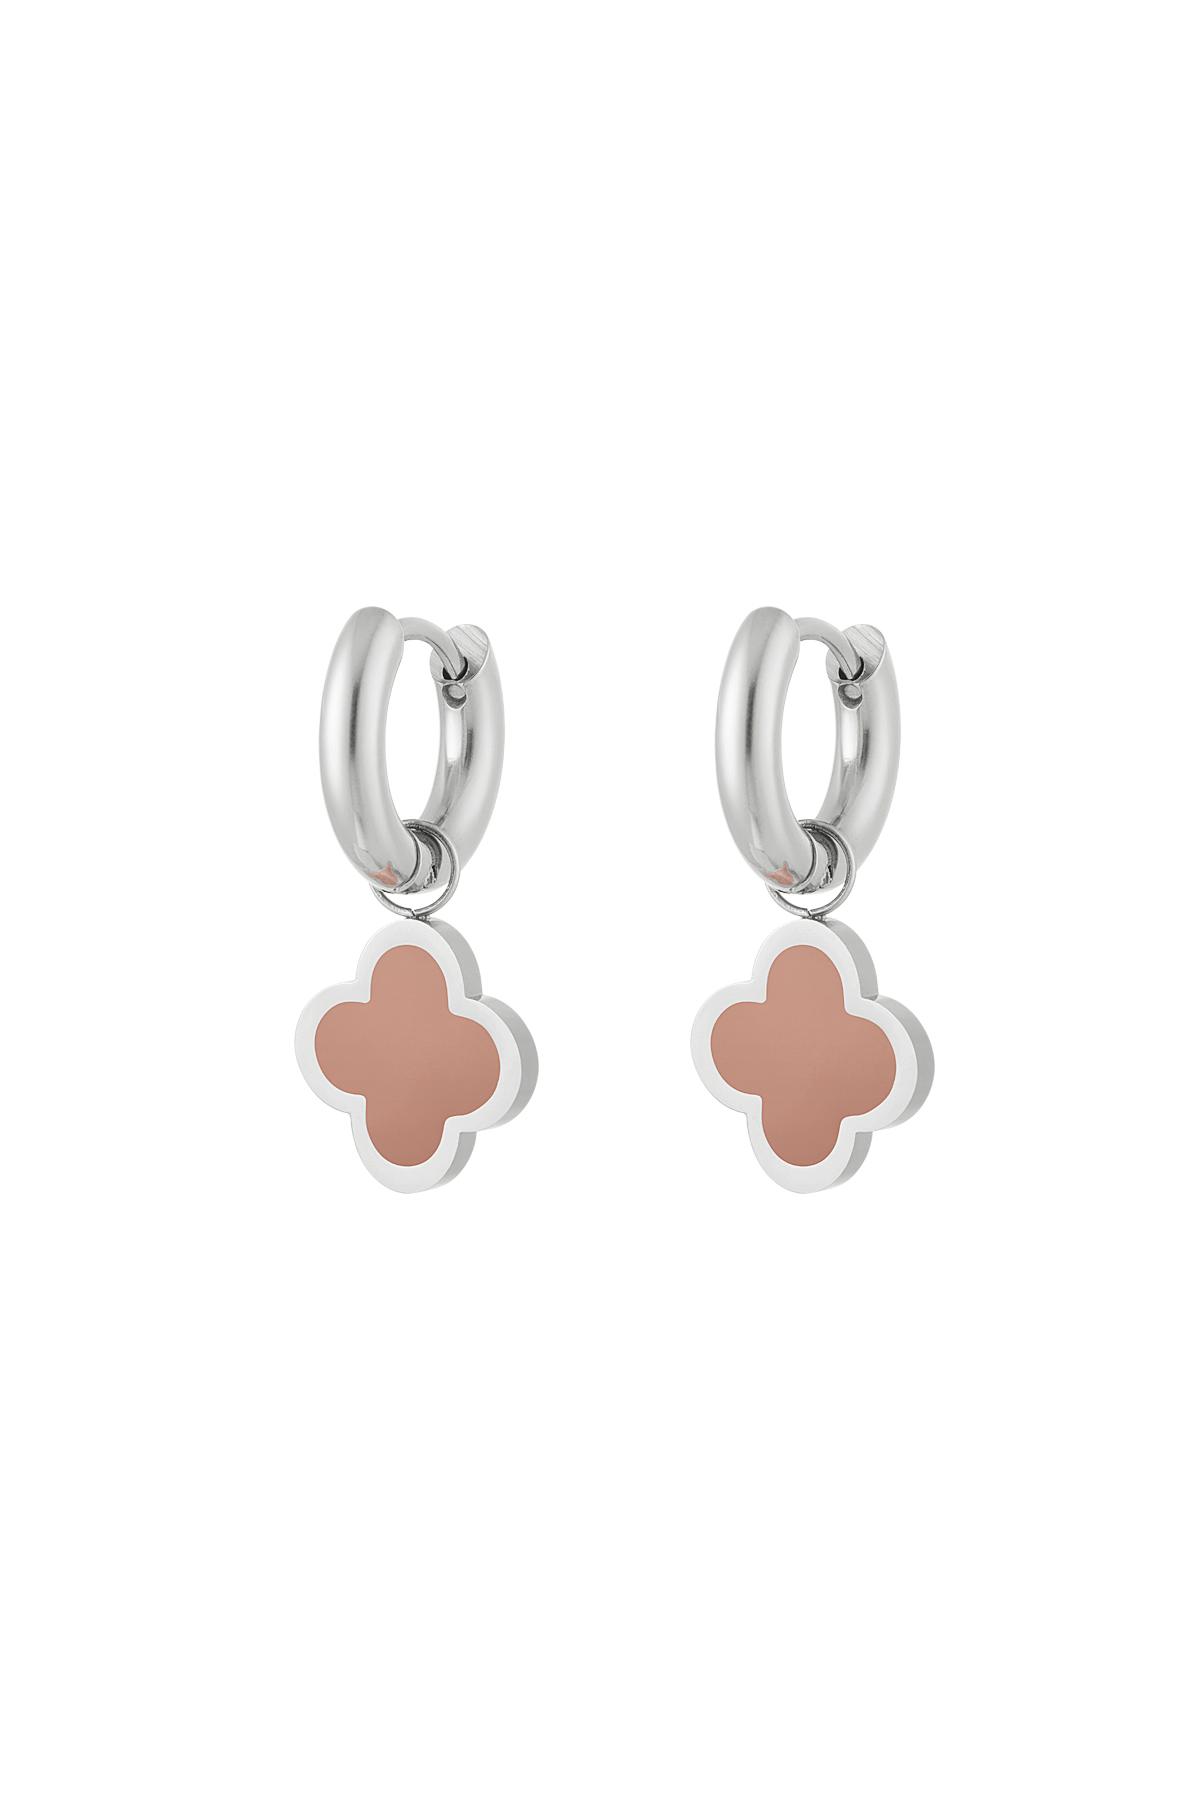 Earrings clover simple colorful Pink & Silver Stainless Steel 